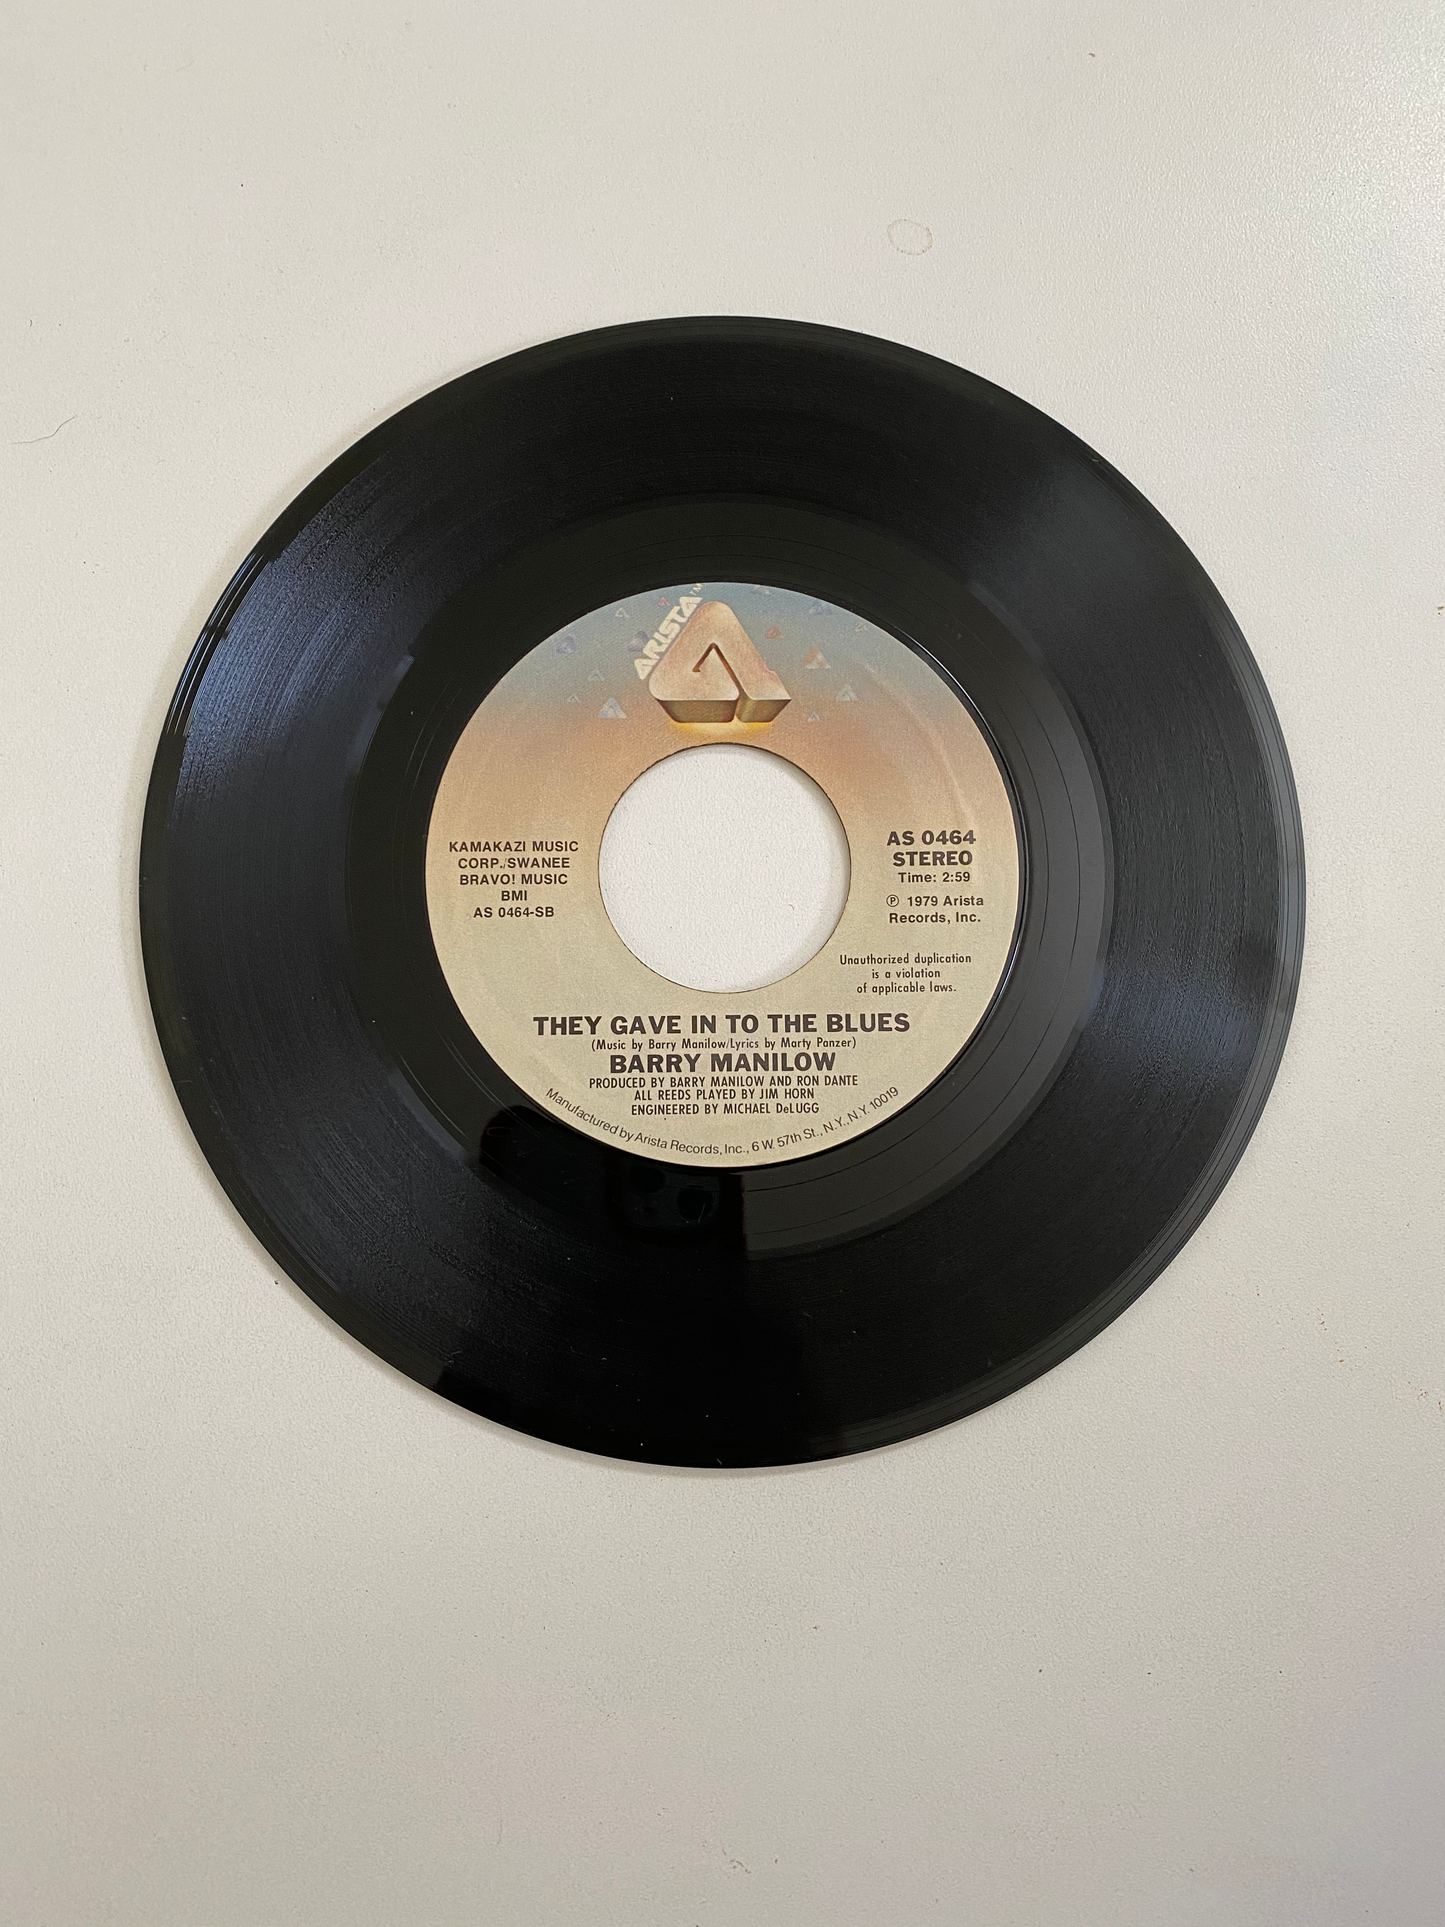 Barry Manilow - Ships | 45 The Vintedge Co.